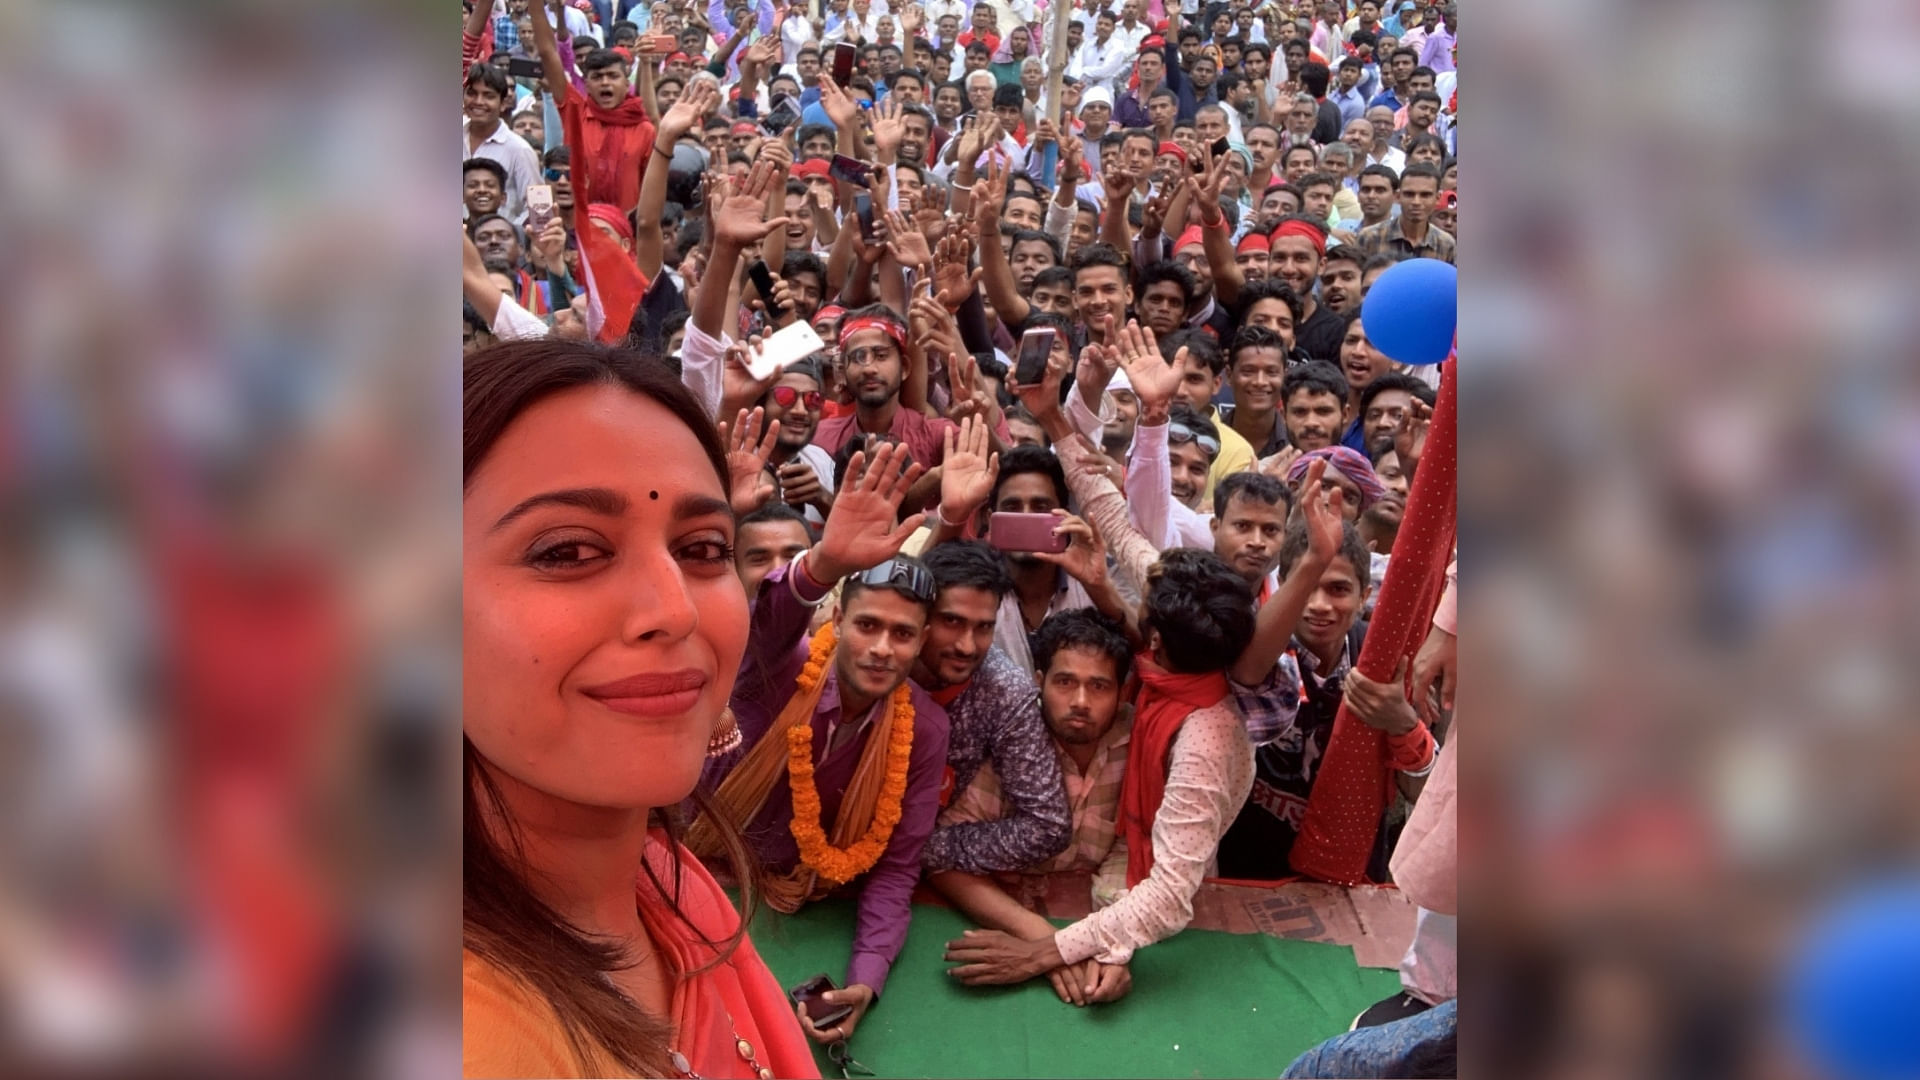 Swara Bhasker campaigns for CPI candidate in Bihar’s Begusarai district.